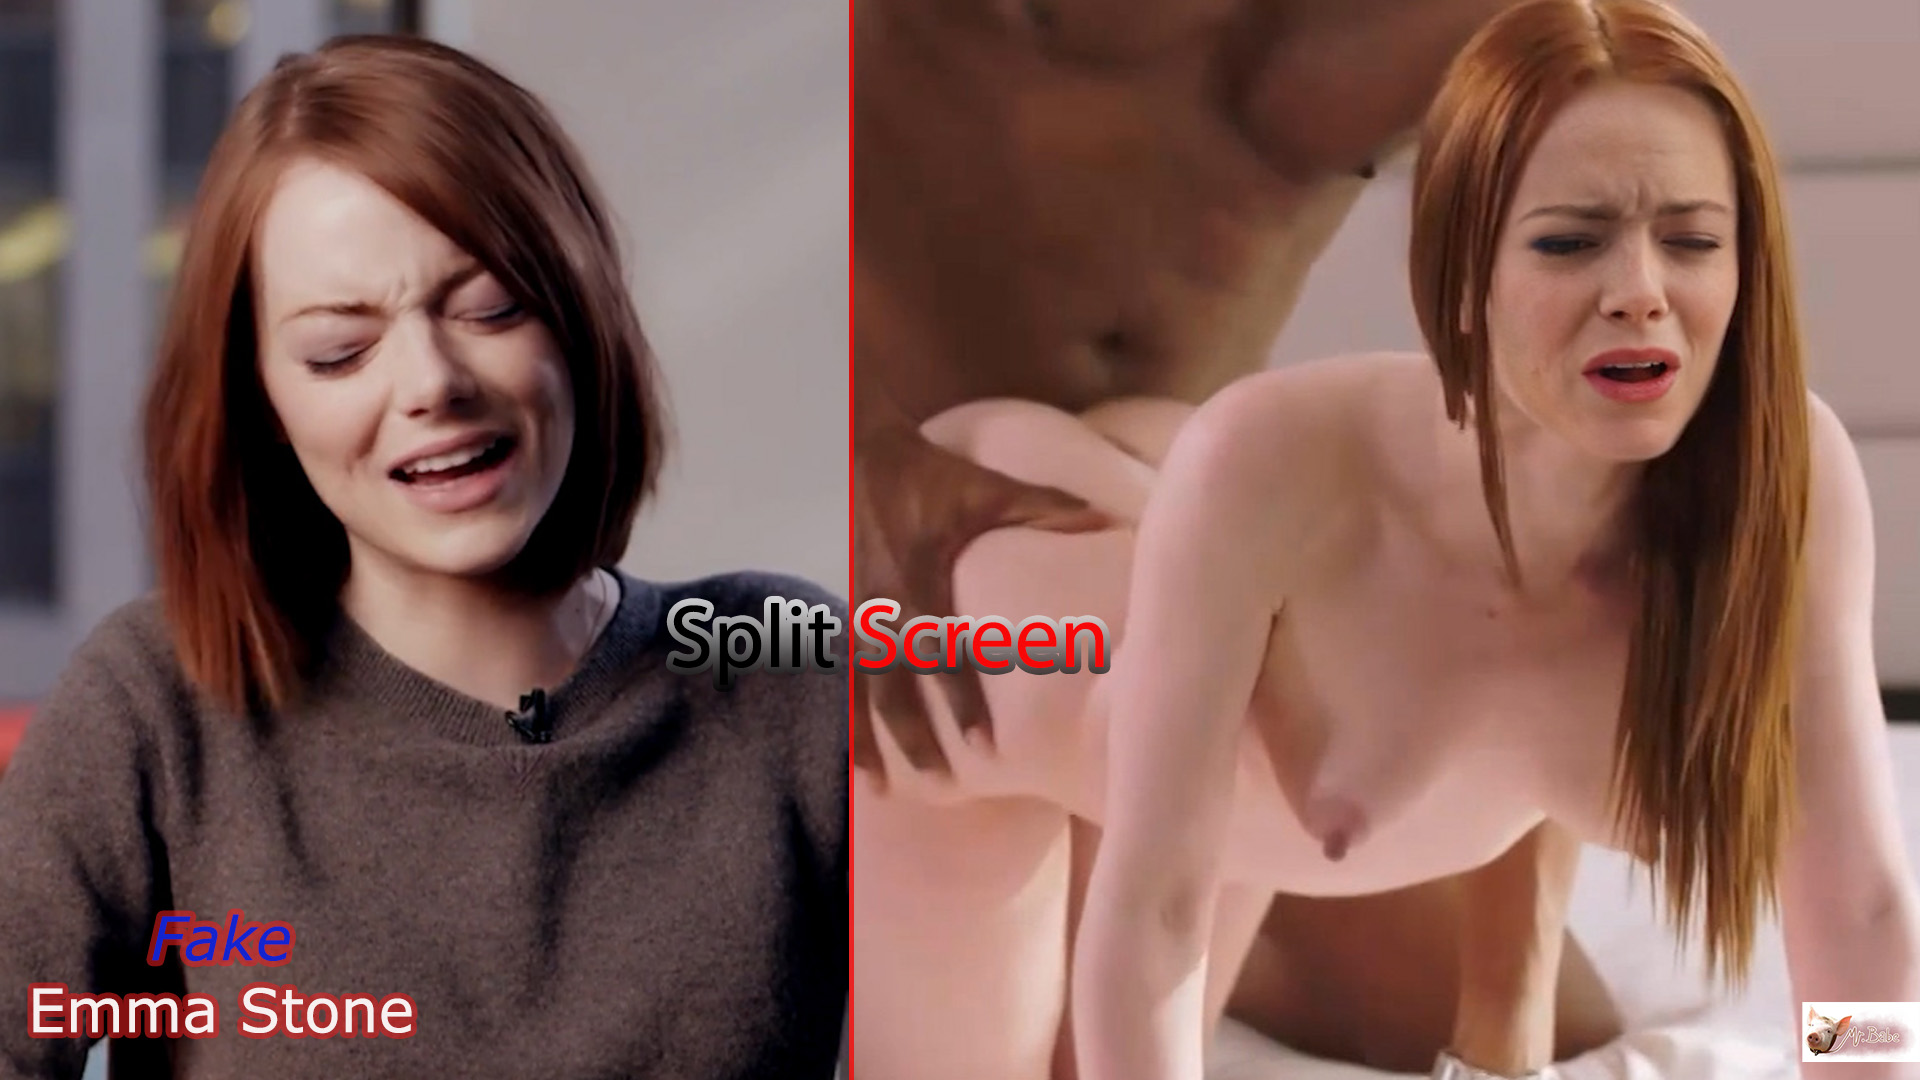 alicia panganiban recommends Nudes Of Emma Stone